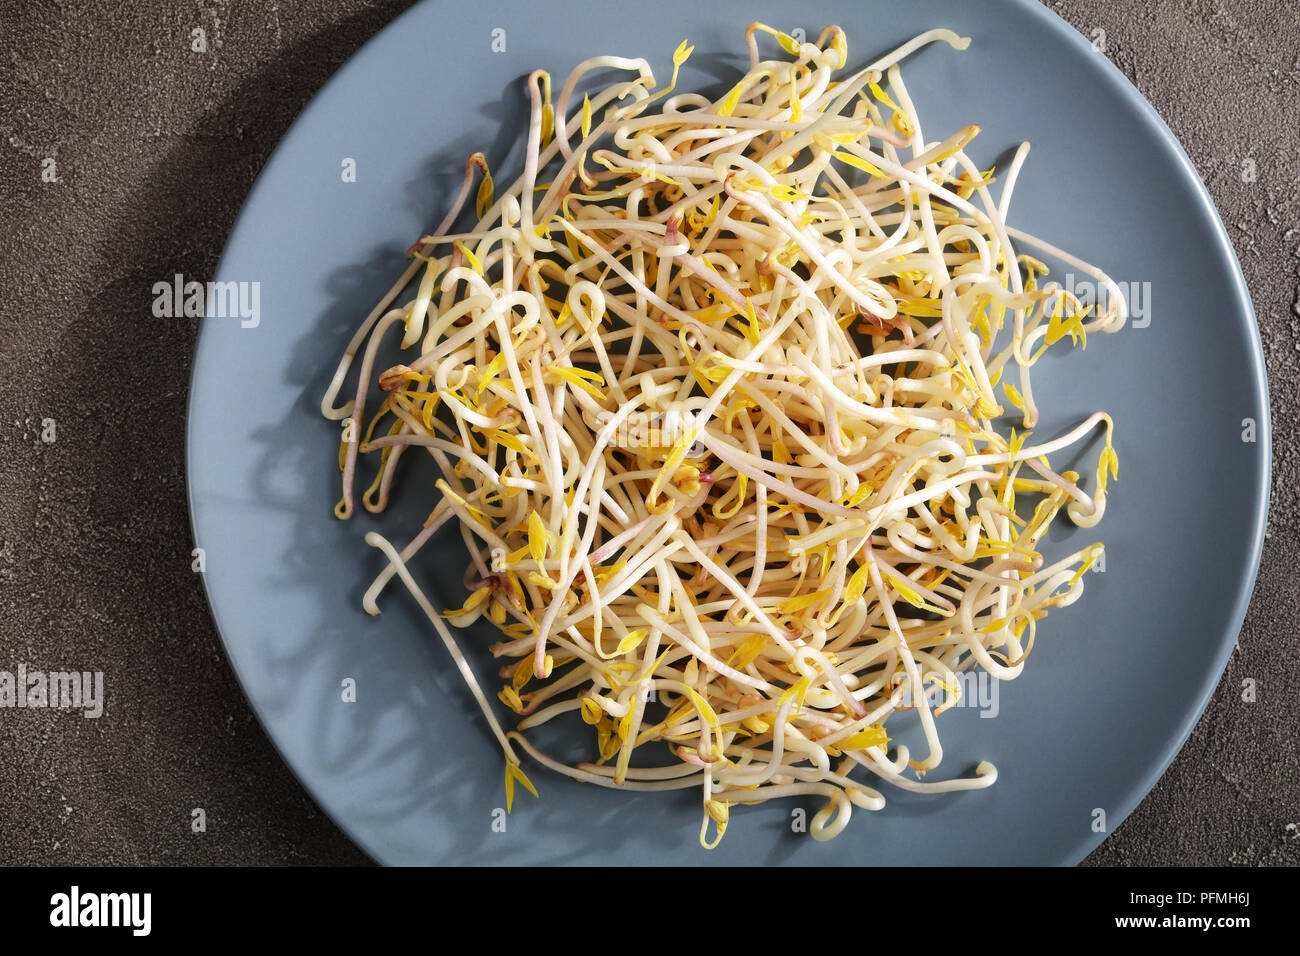 freshly grown mung Bean Sprouts on plate on concrete background, major ingredient of asian cuisine, view form above, close-up Stock Photo